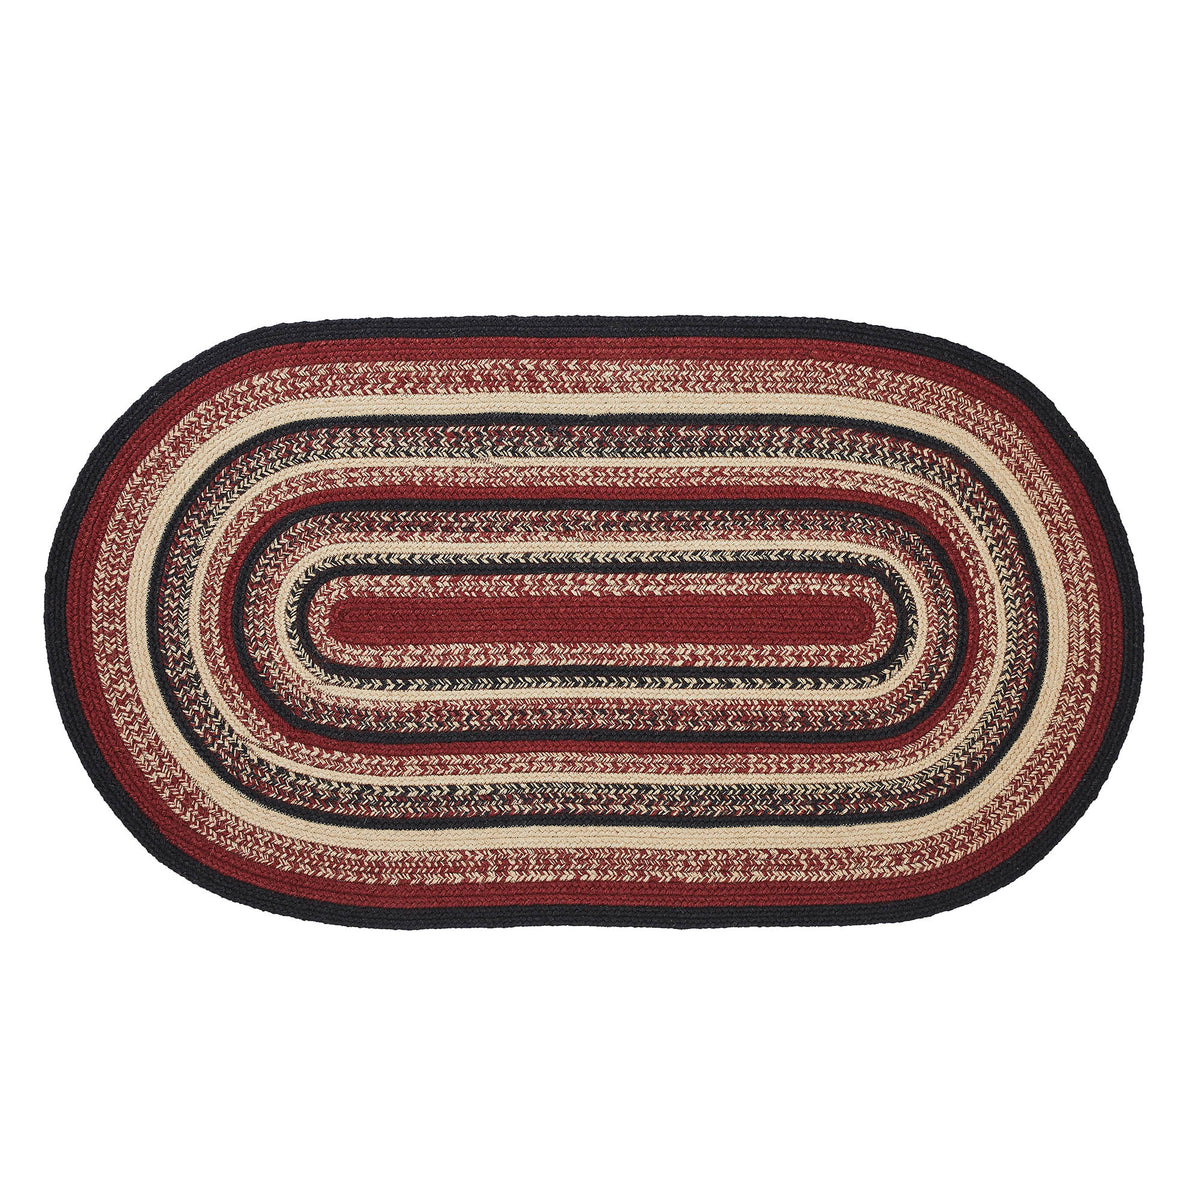 Connell Jute Rug Oval w/ Pad 27x48